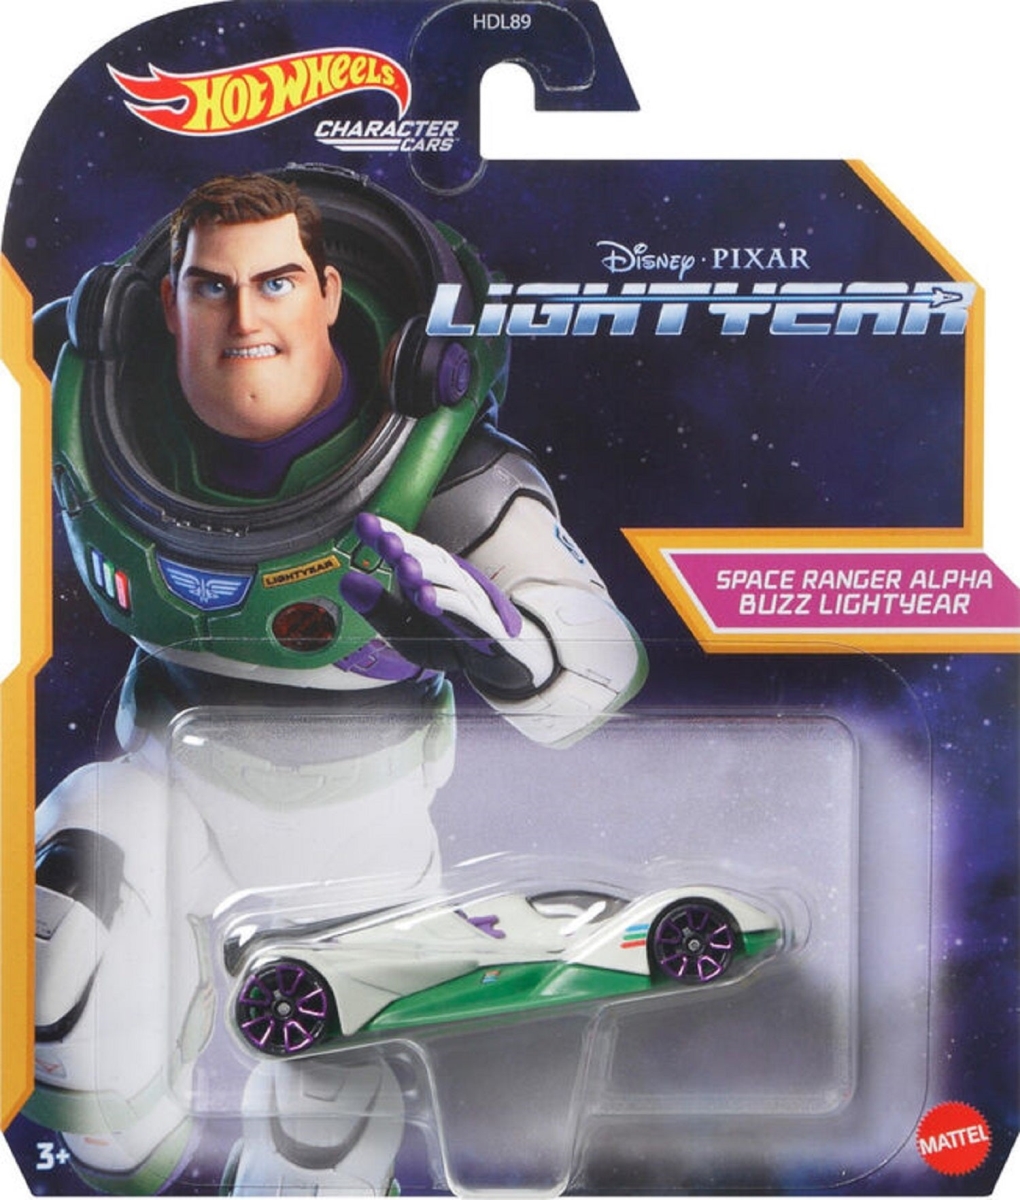 Picture of Hot Wheels 30395205 Lightyear Buzz Lightyear Character Car